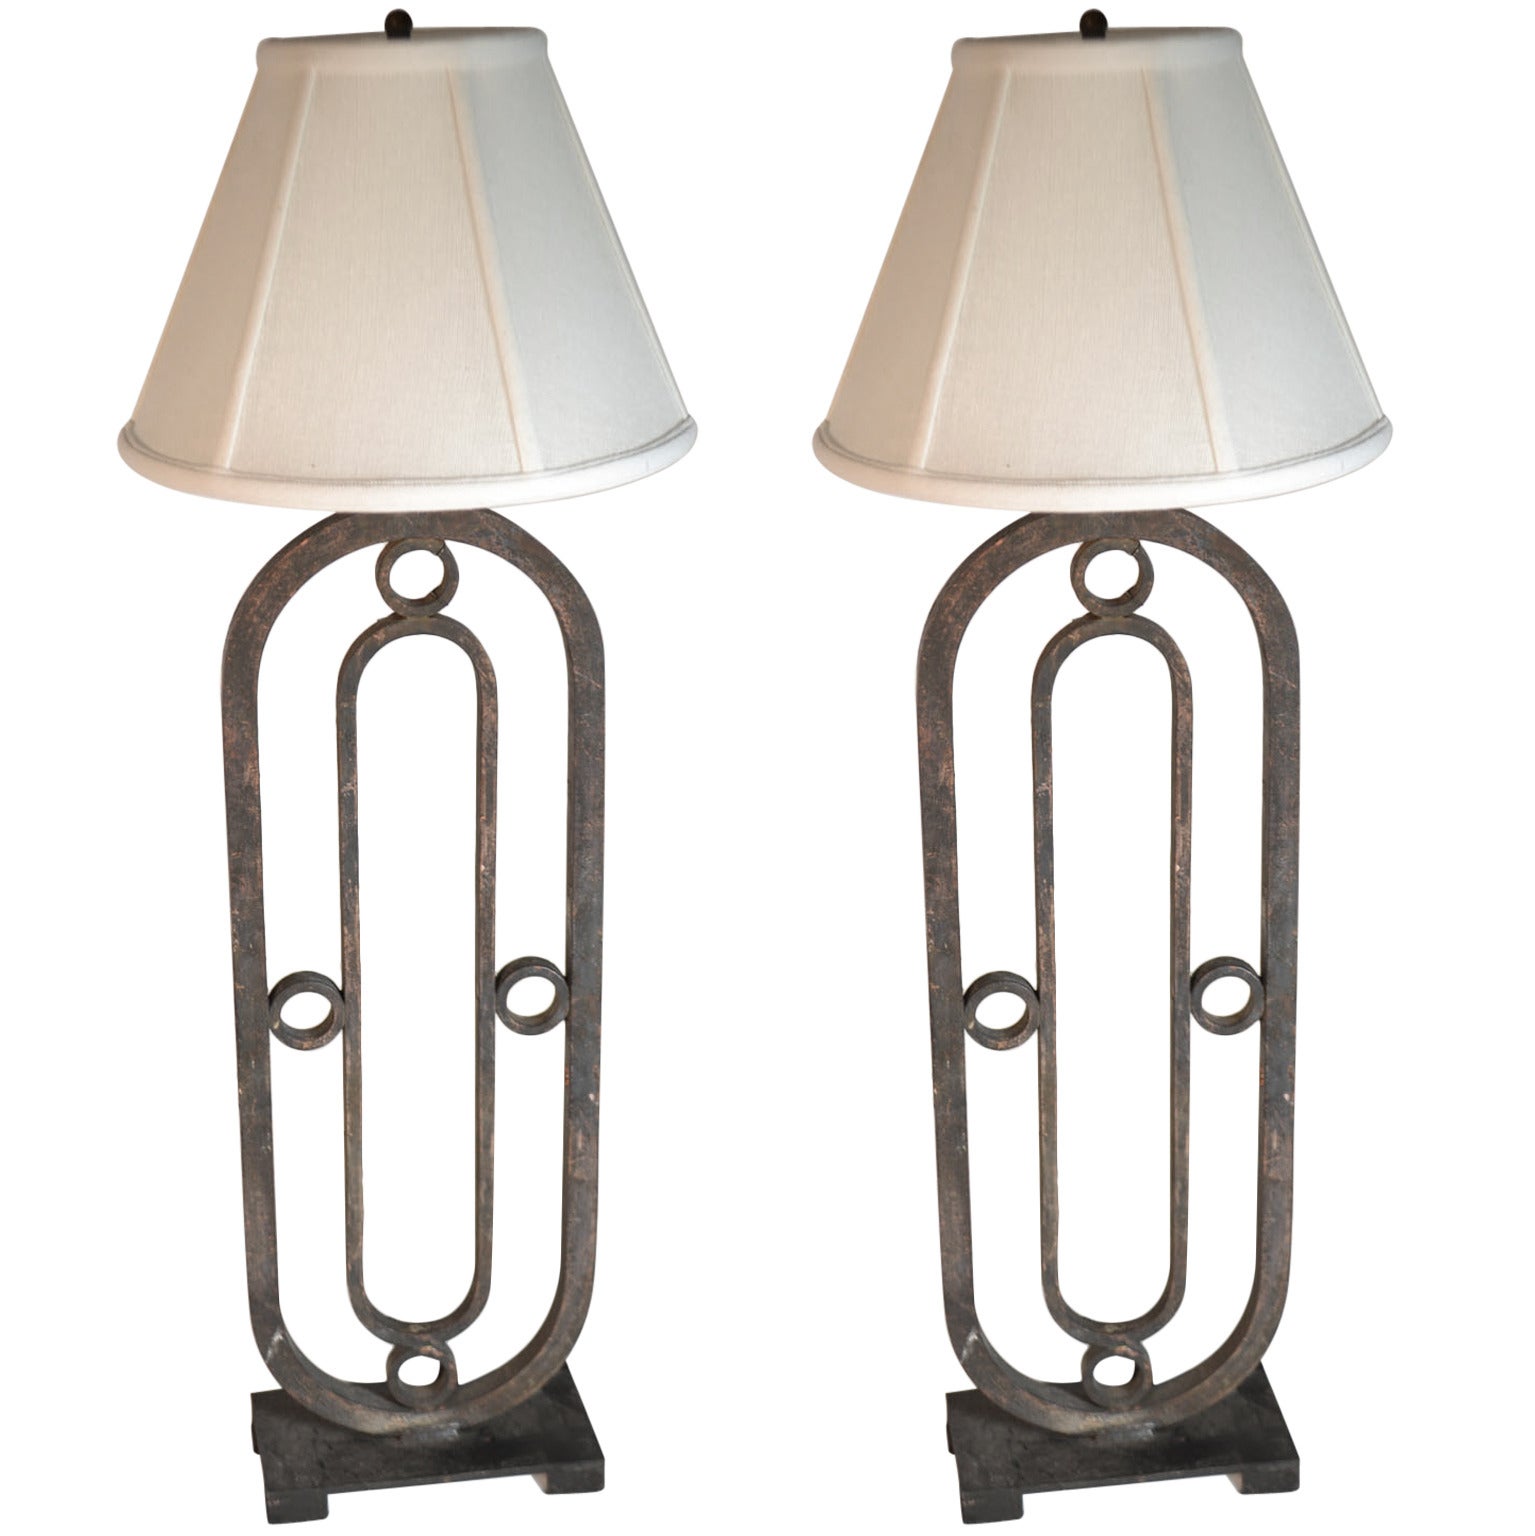 Pair of Wrought Iron Lamps Made from Old Grates